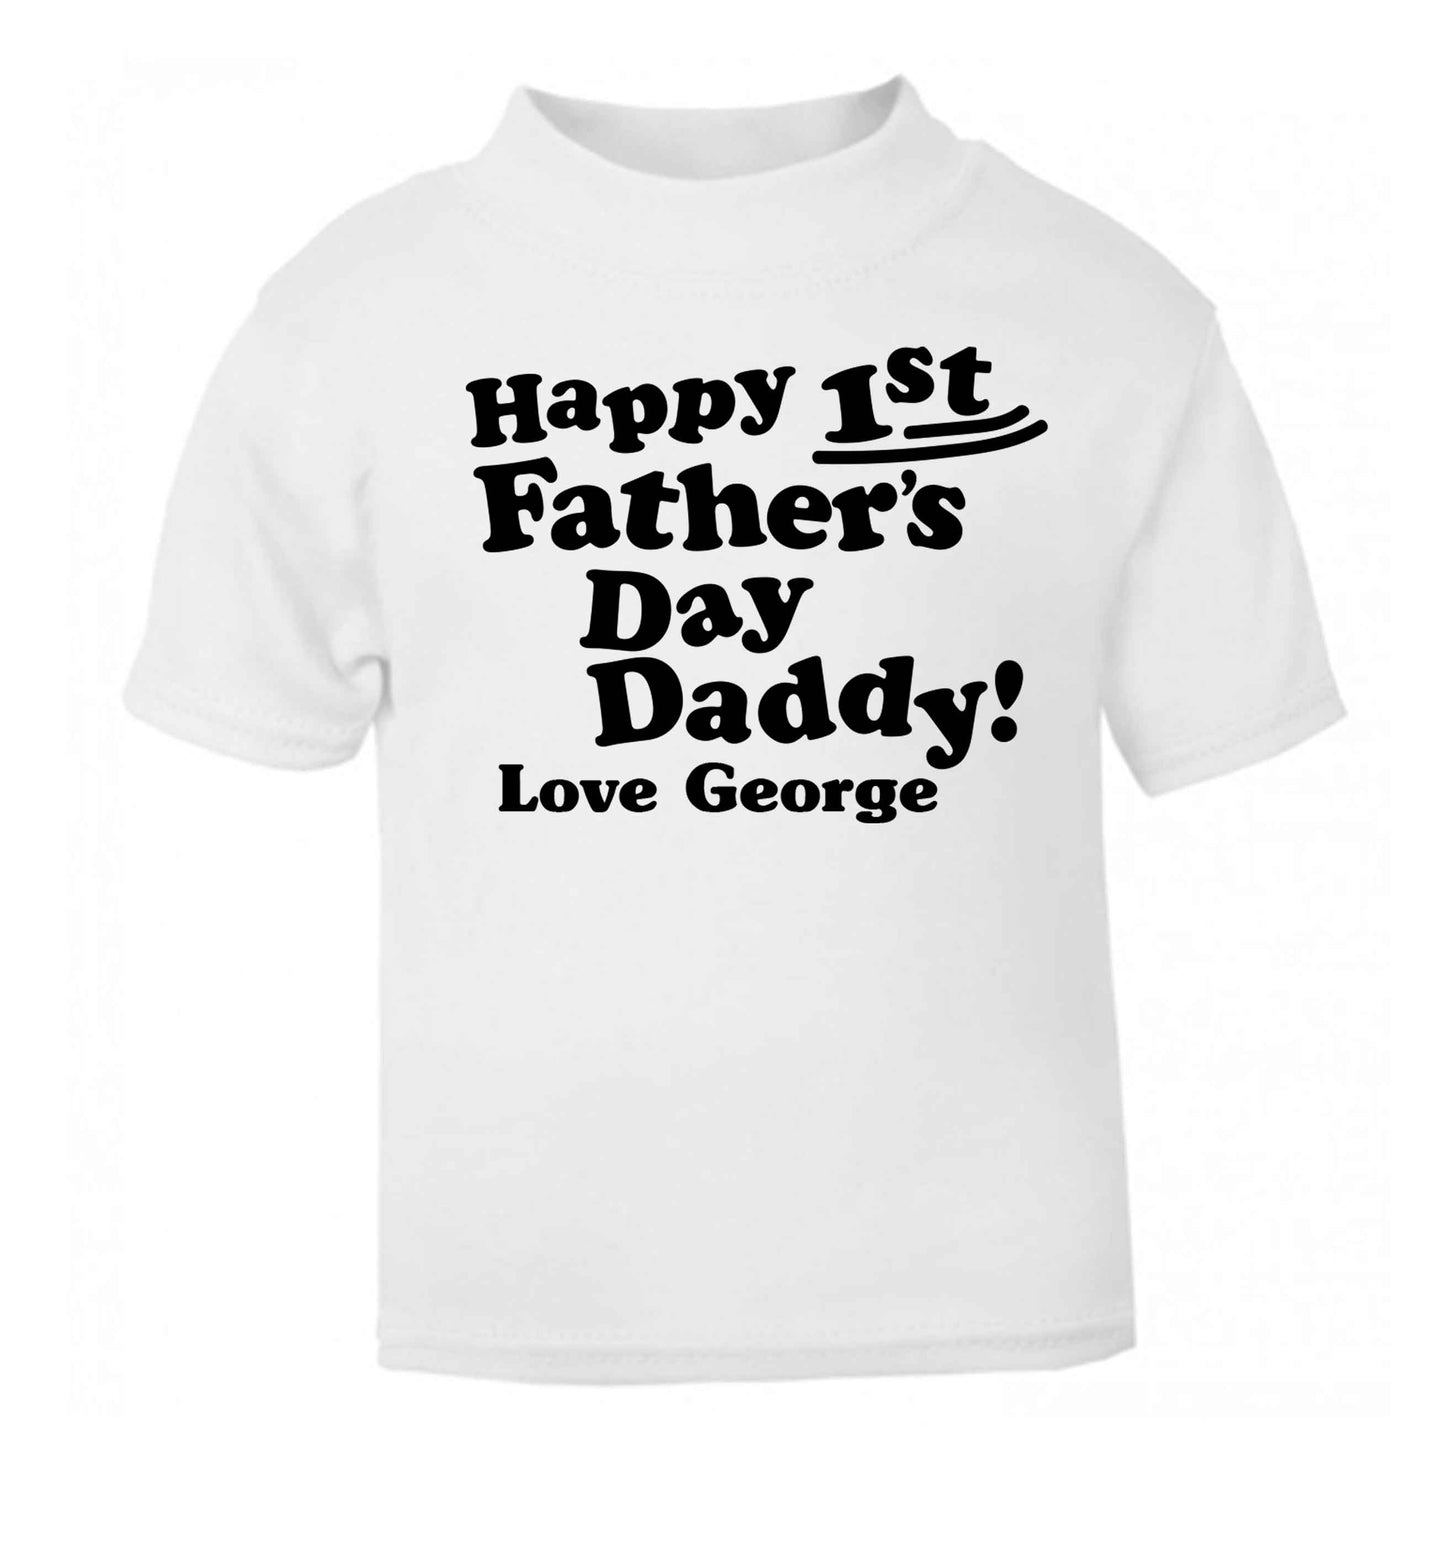 Happy first Fathers Day daddy love personalised white baby toddler Tshirt 2 Years